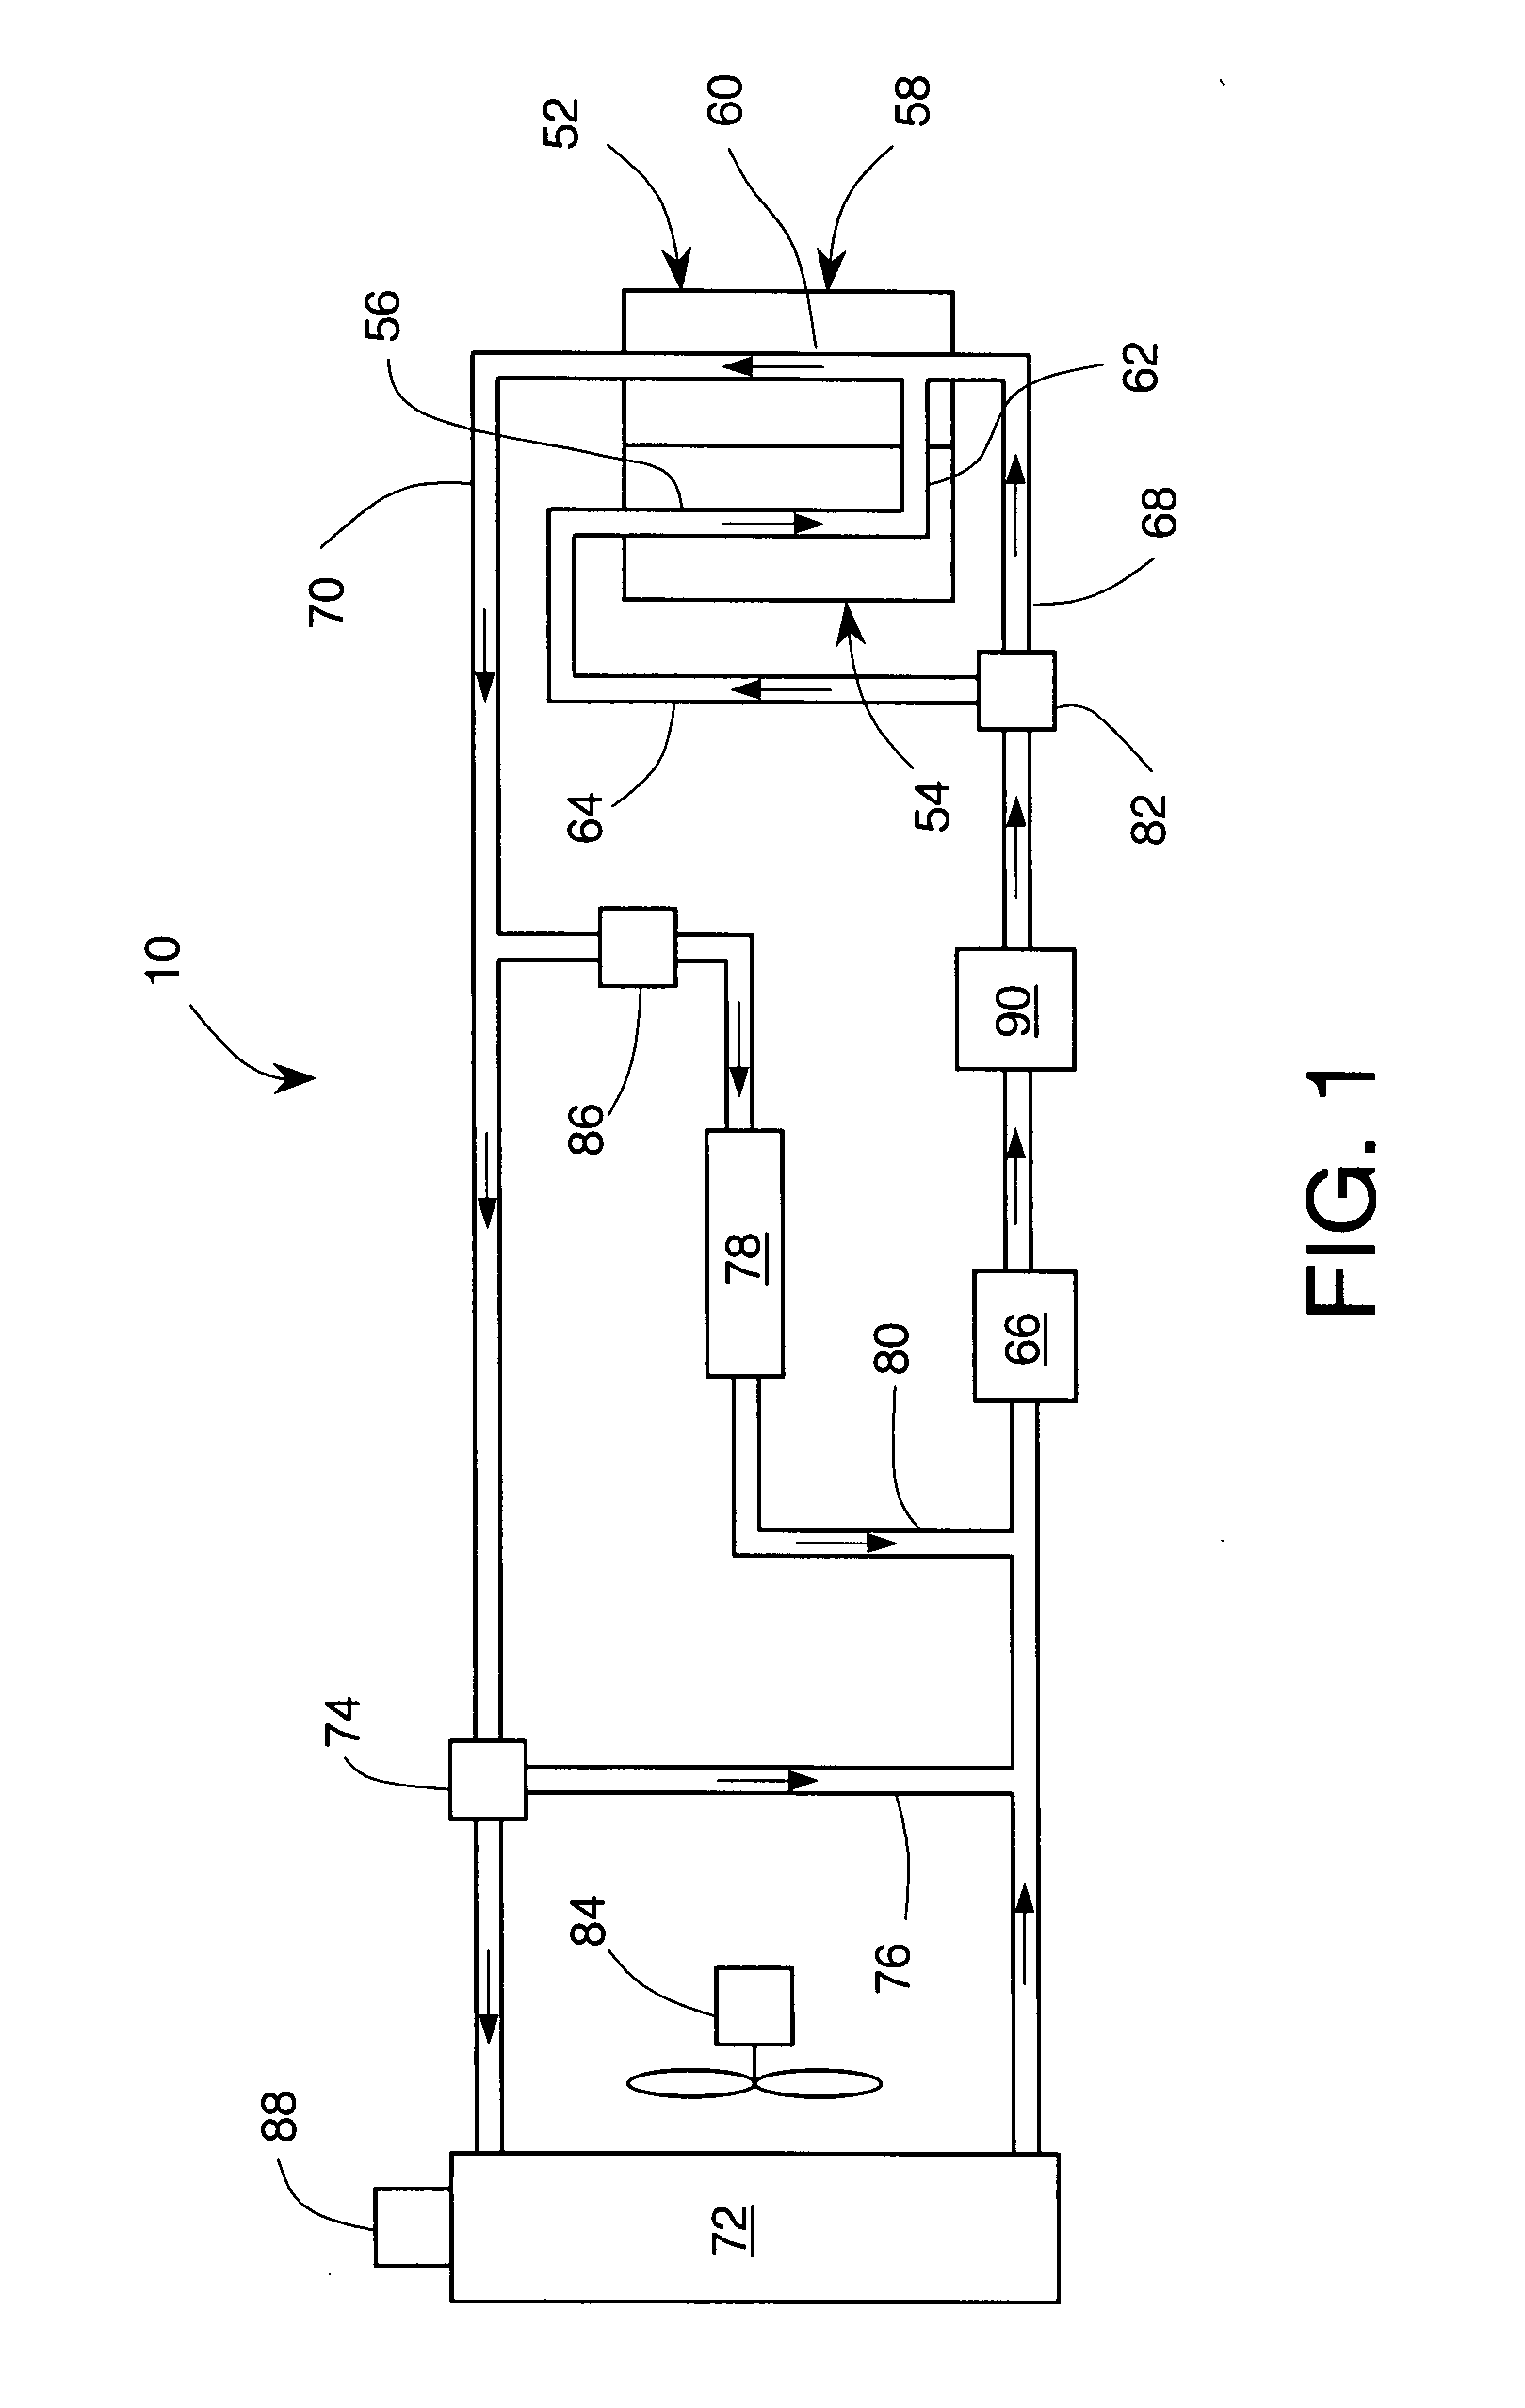 Engine cooling system with overload handling capability